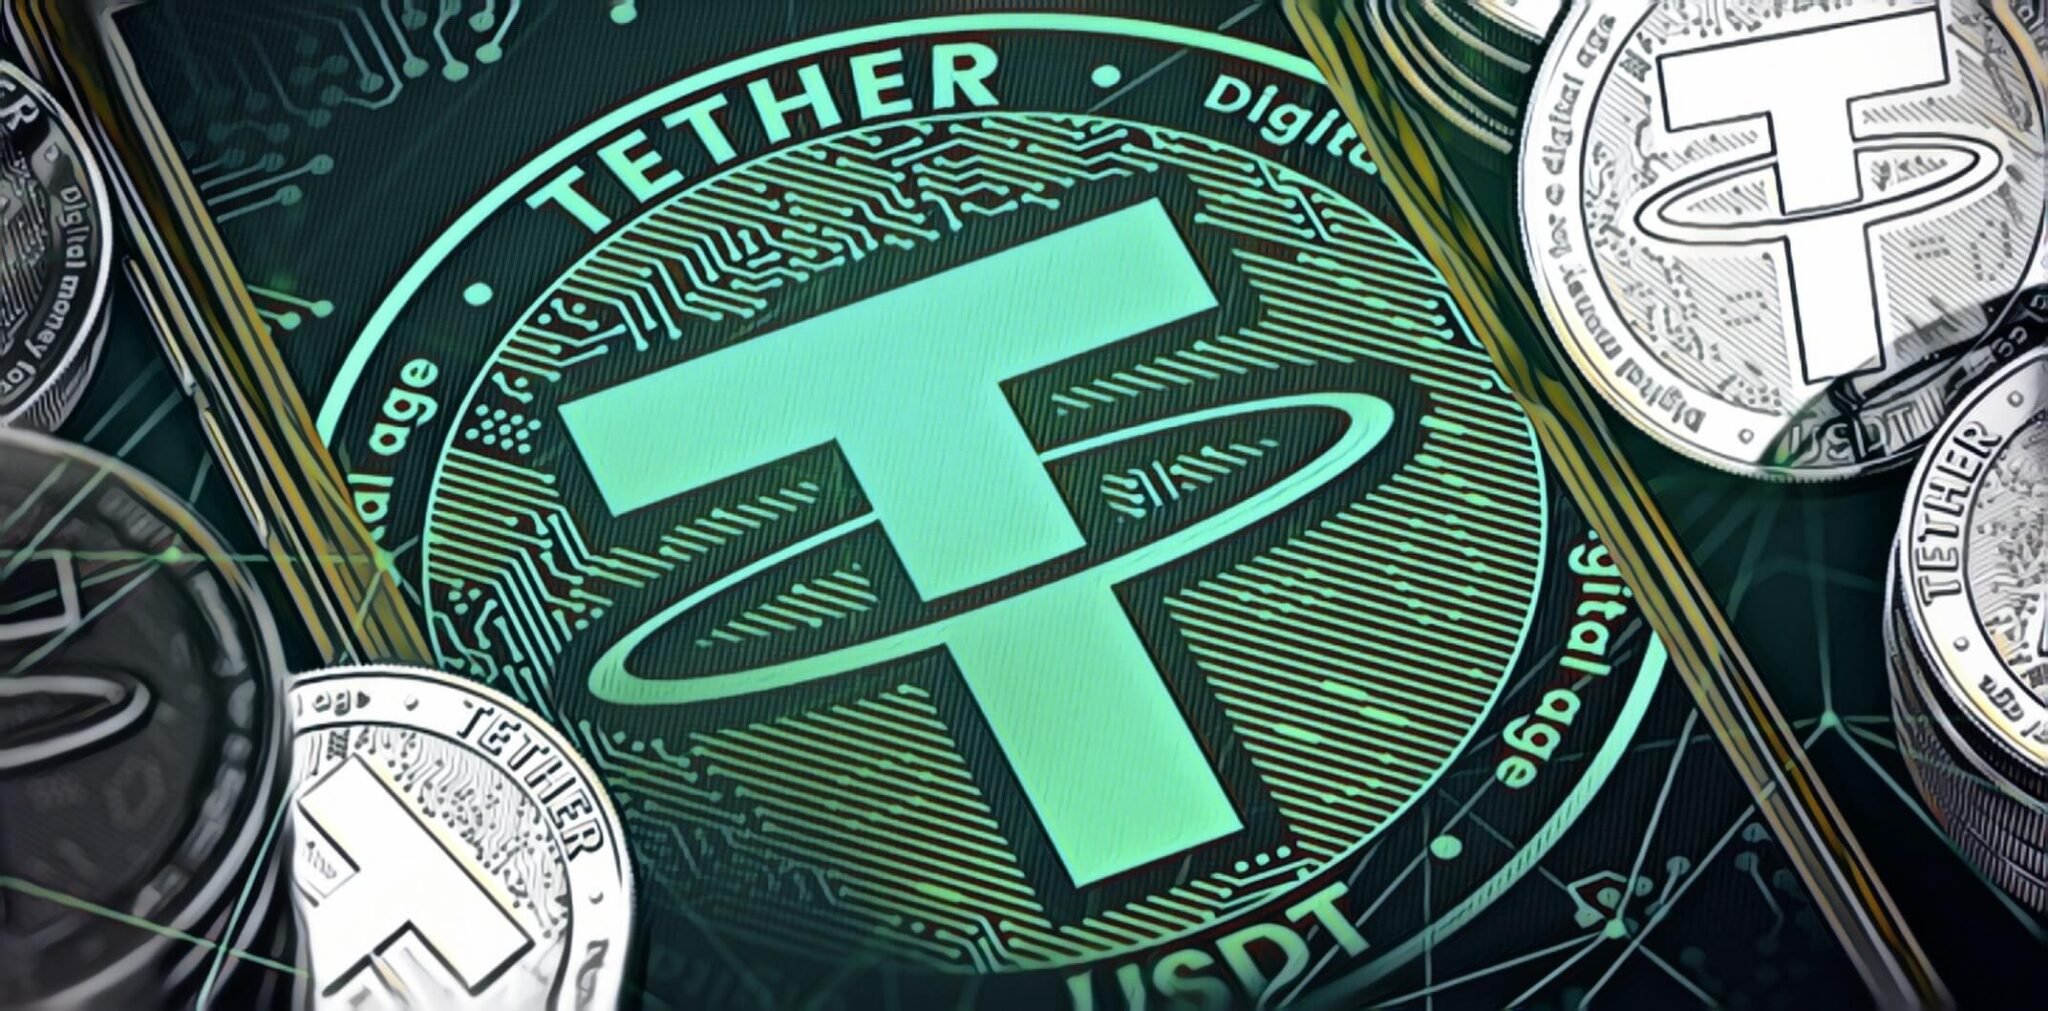 Tether’s market capitalization (USDT) represents 46% of the total valuation of stablecoins